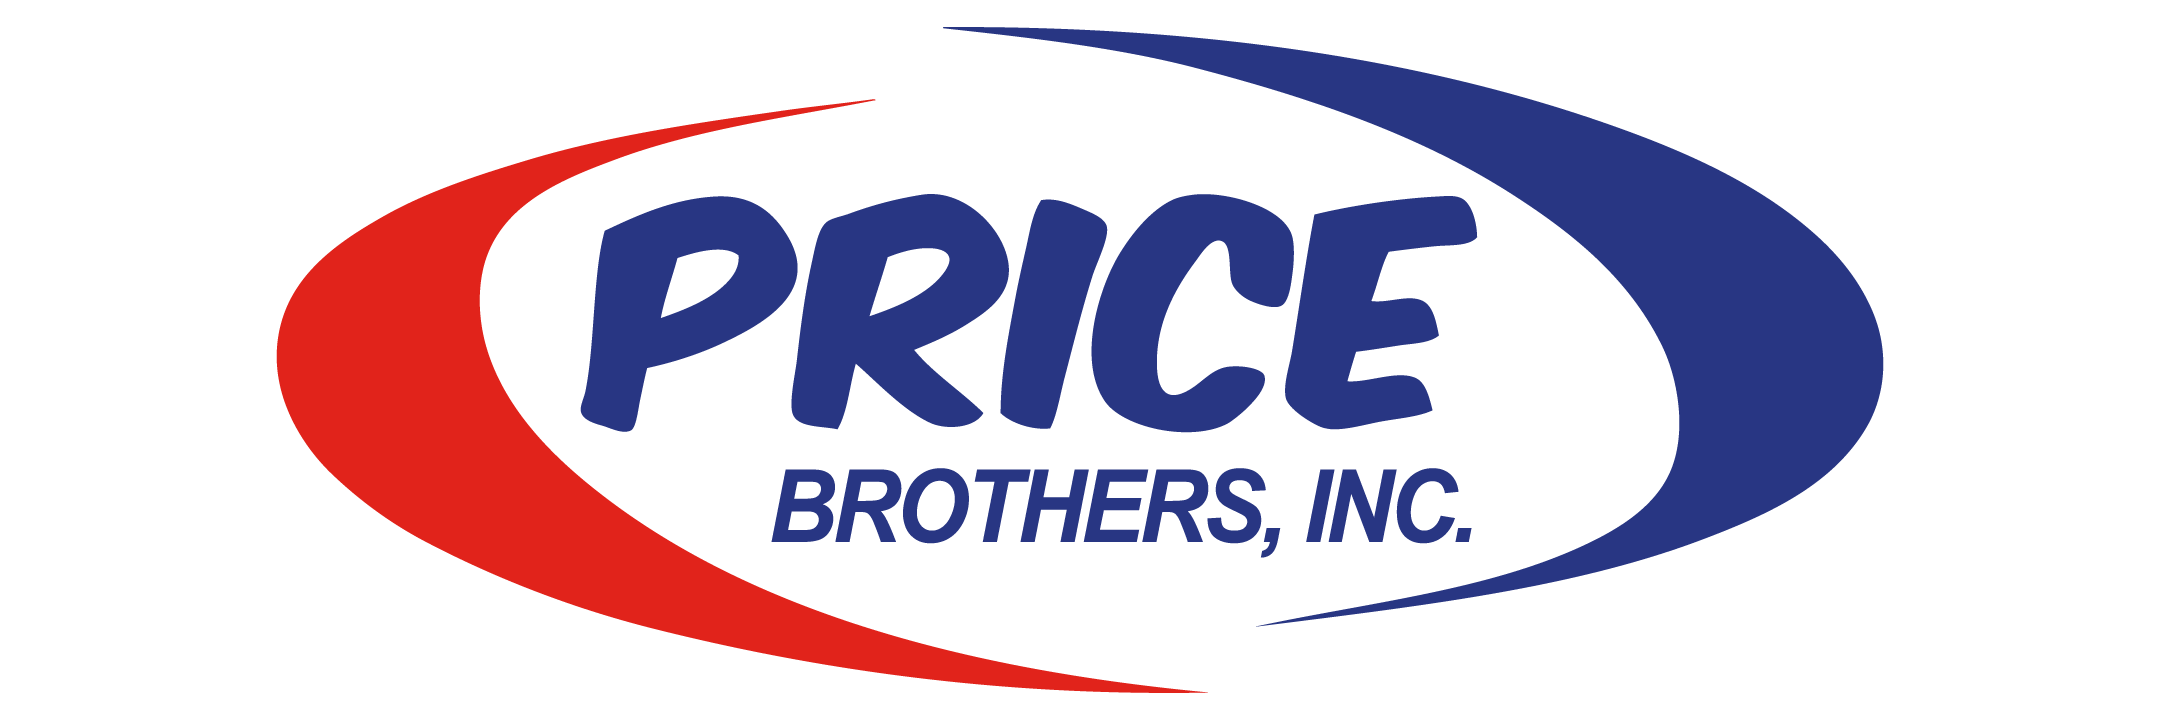 D. Price Brothers (Tier 4)